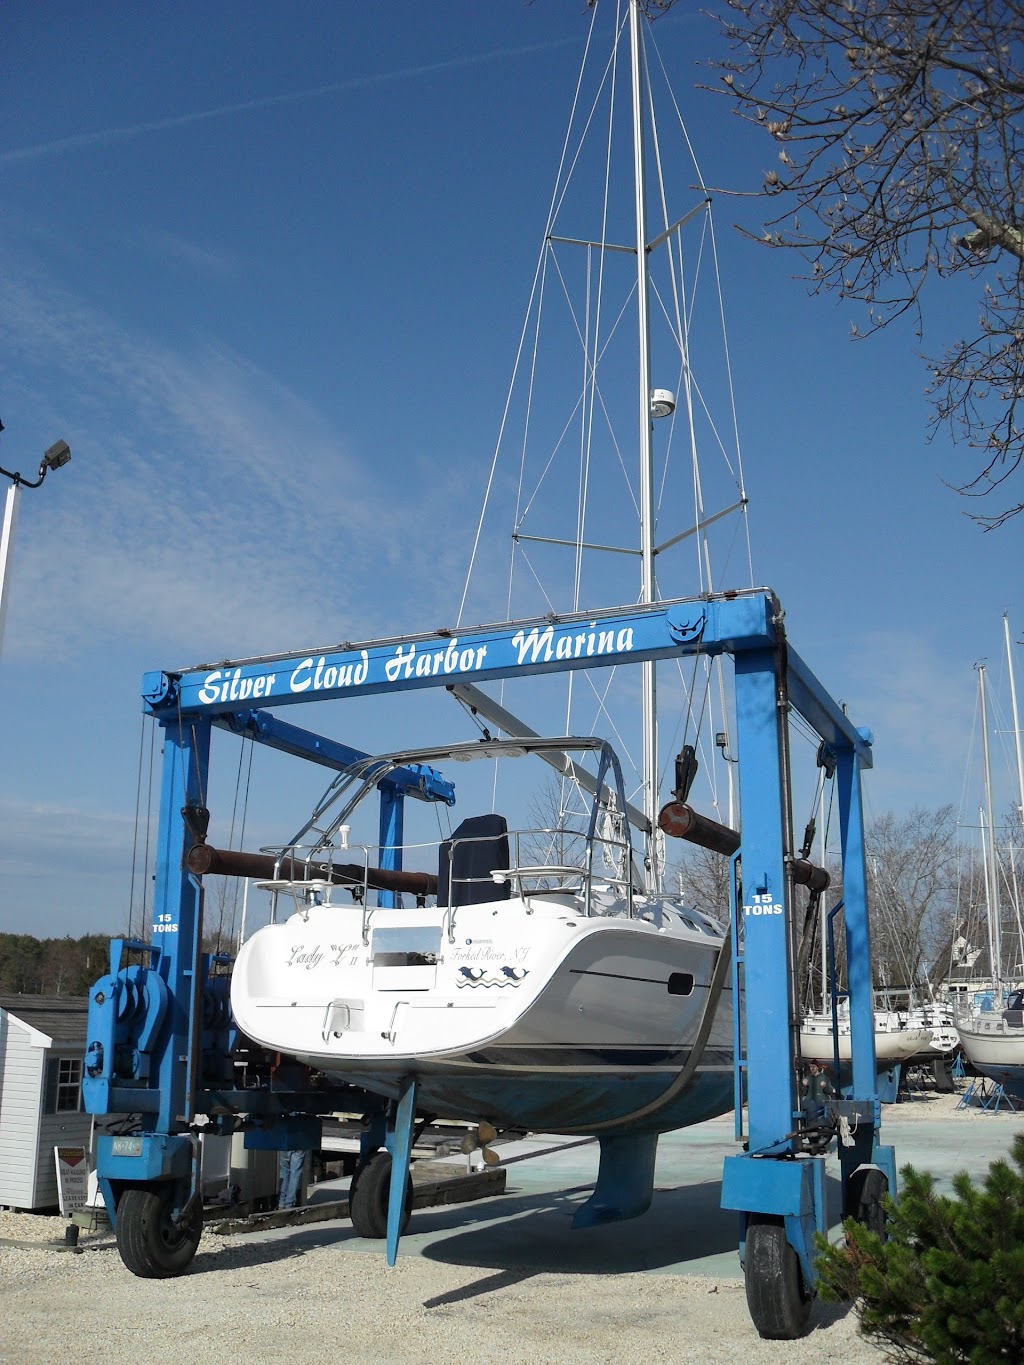 Silver Cloud Harbor Marina | 107 Bay Ave, Forked River, NJ 08731 | Phone: (609) 693-2145